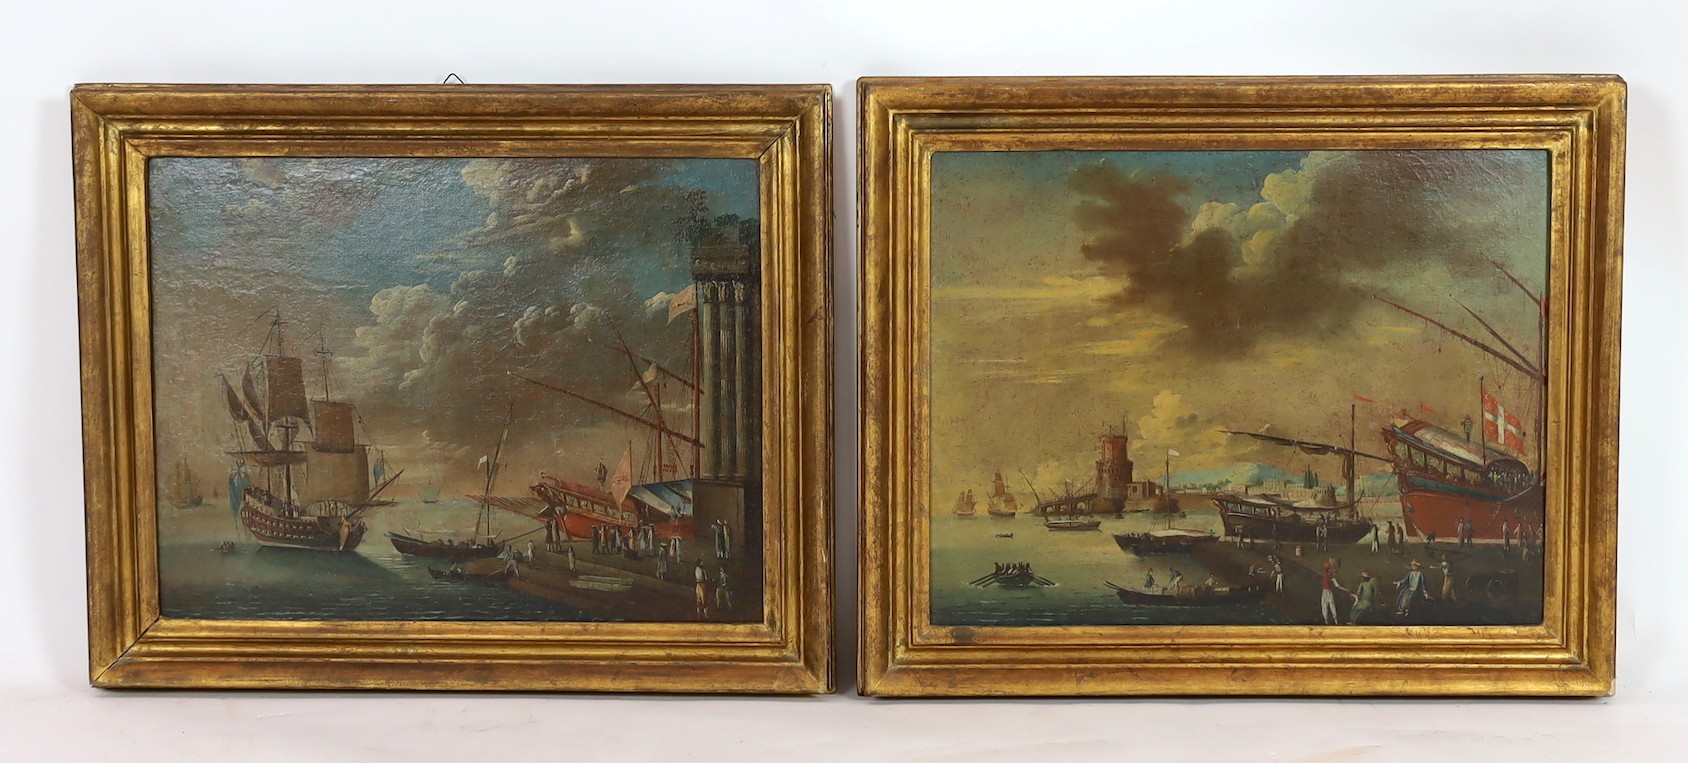 After Francesco Guardi (Italian, 1712-1793), Merchant vessels and other shipping along the shore, including an English warship and merchants barge, pair of oils on canvas, 46 x 60cm                                       